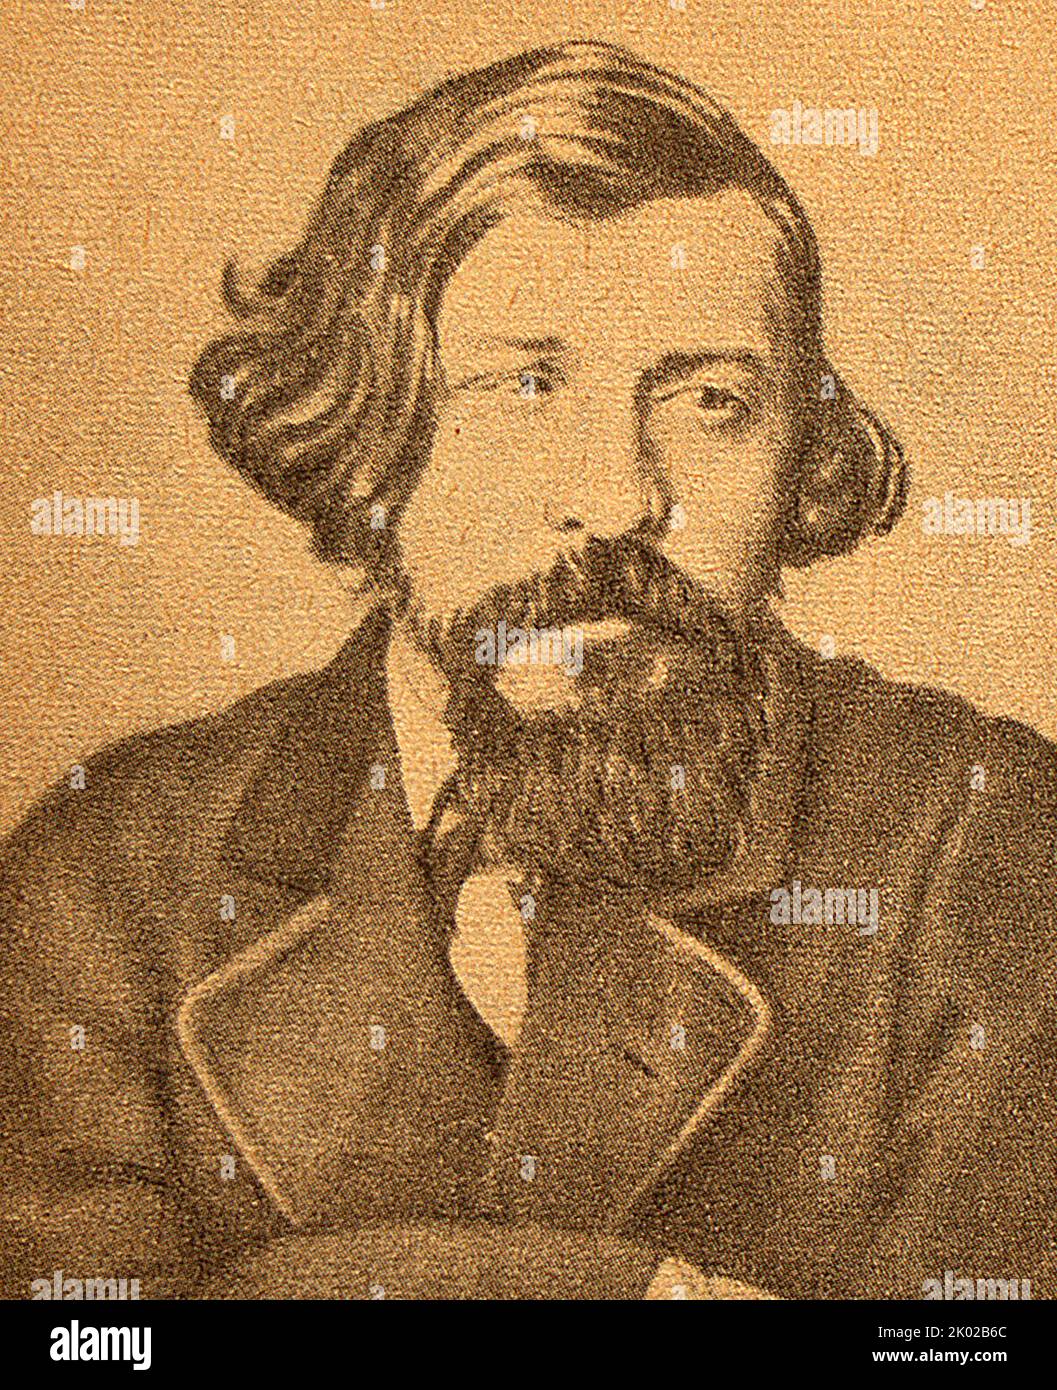 Nikolay Gavrilovich Chernyshevsky (1828 - 1889) Russian literary and social critic, journalist, novelist, and socialist philosopher, often identified as an utopian socialist and leading theoretician of Russian nihilism. Stock Photo